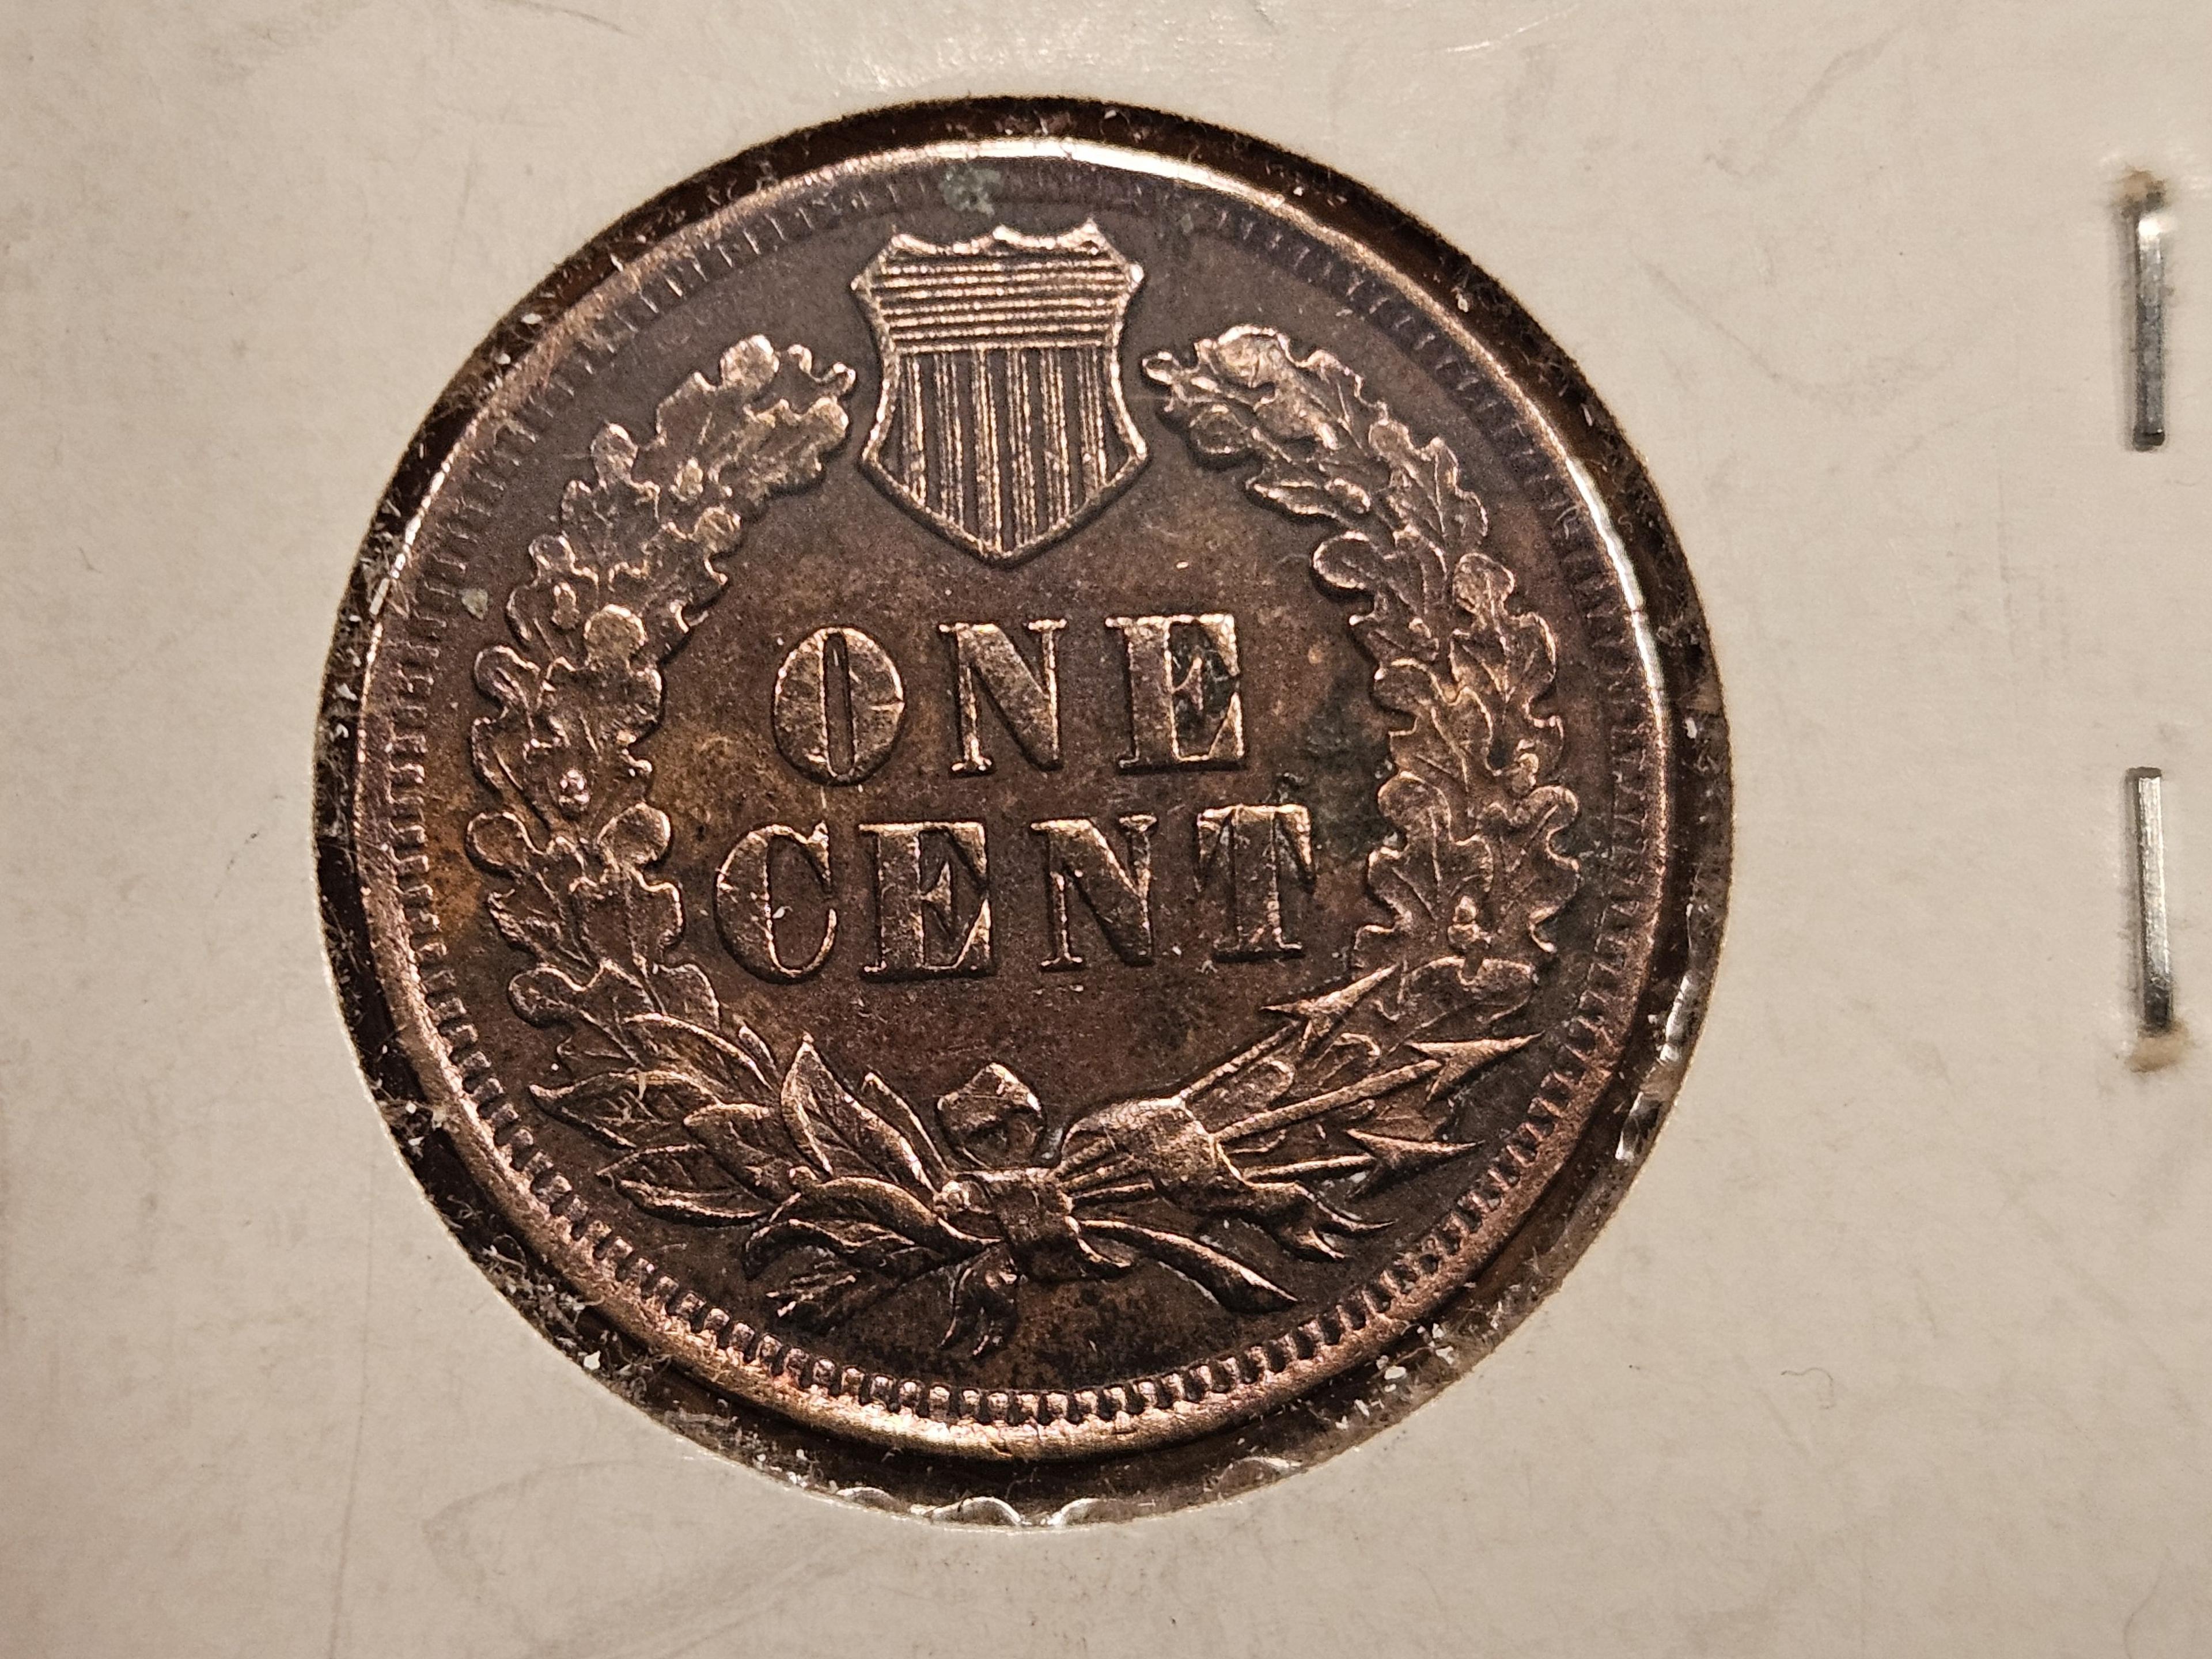 1903 Indian and 1858 Flying Eagle cents